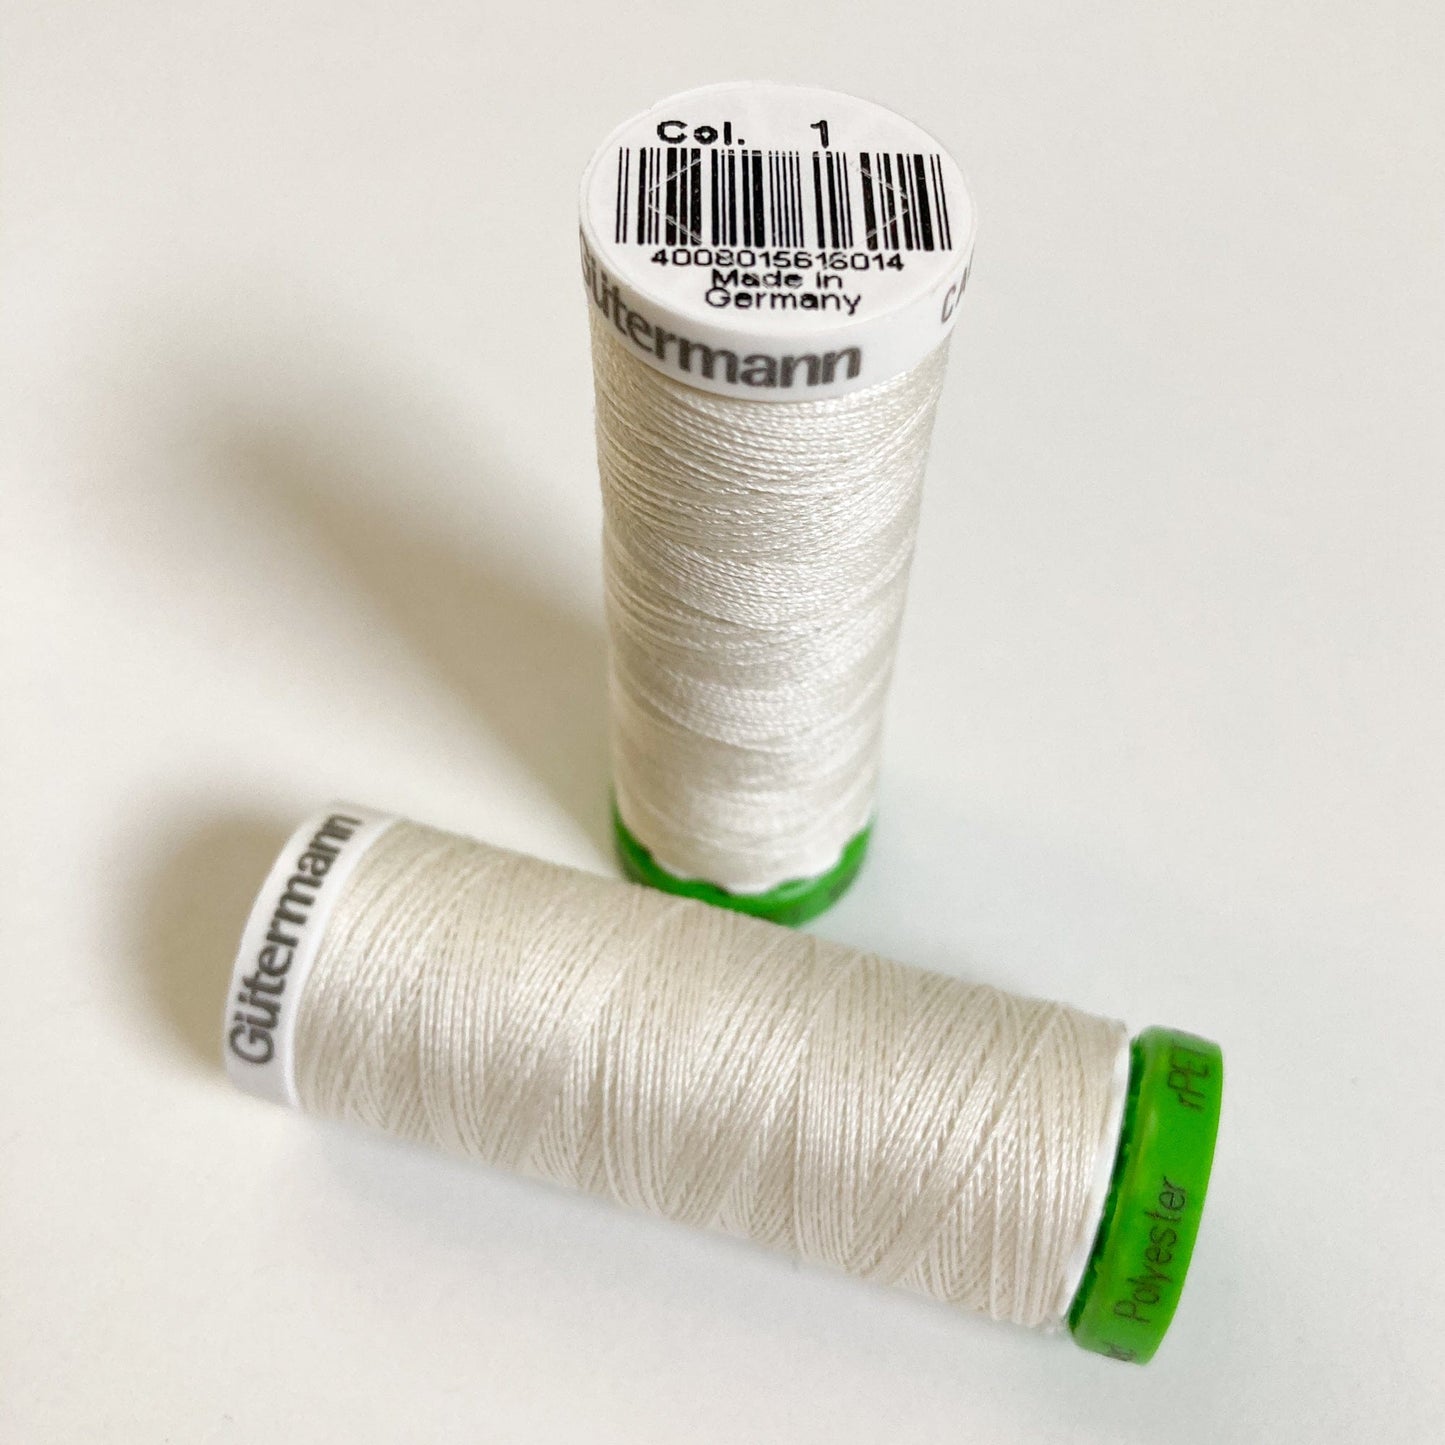 100 m Reel Gütermann Recycled Sew-All Thread in Ivory, No. 1